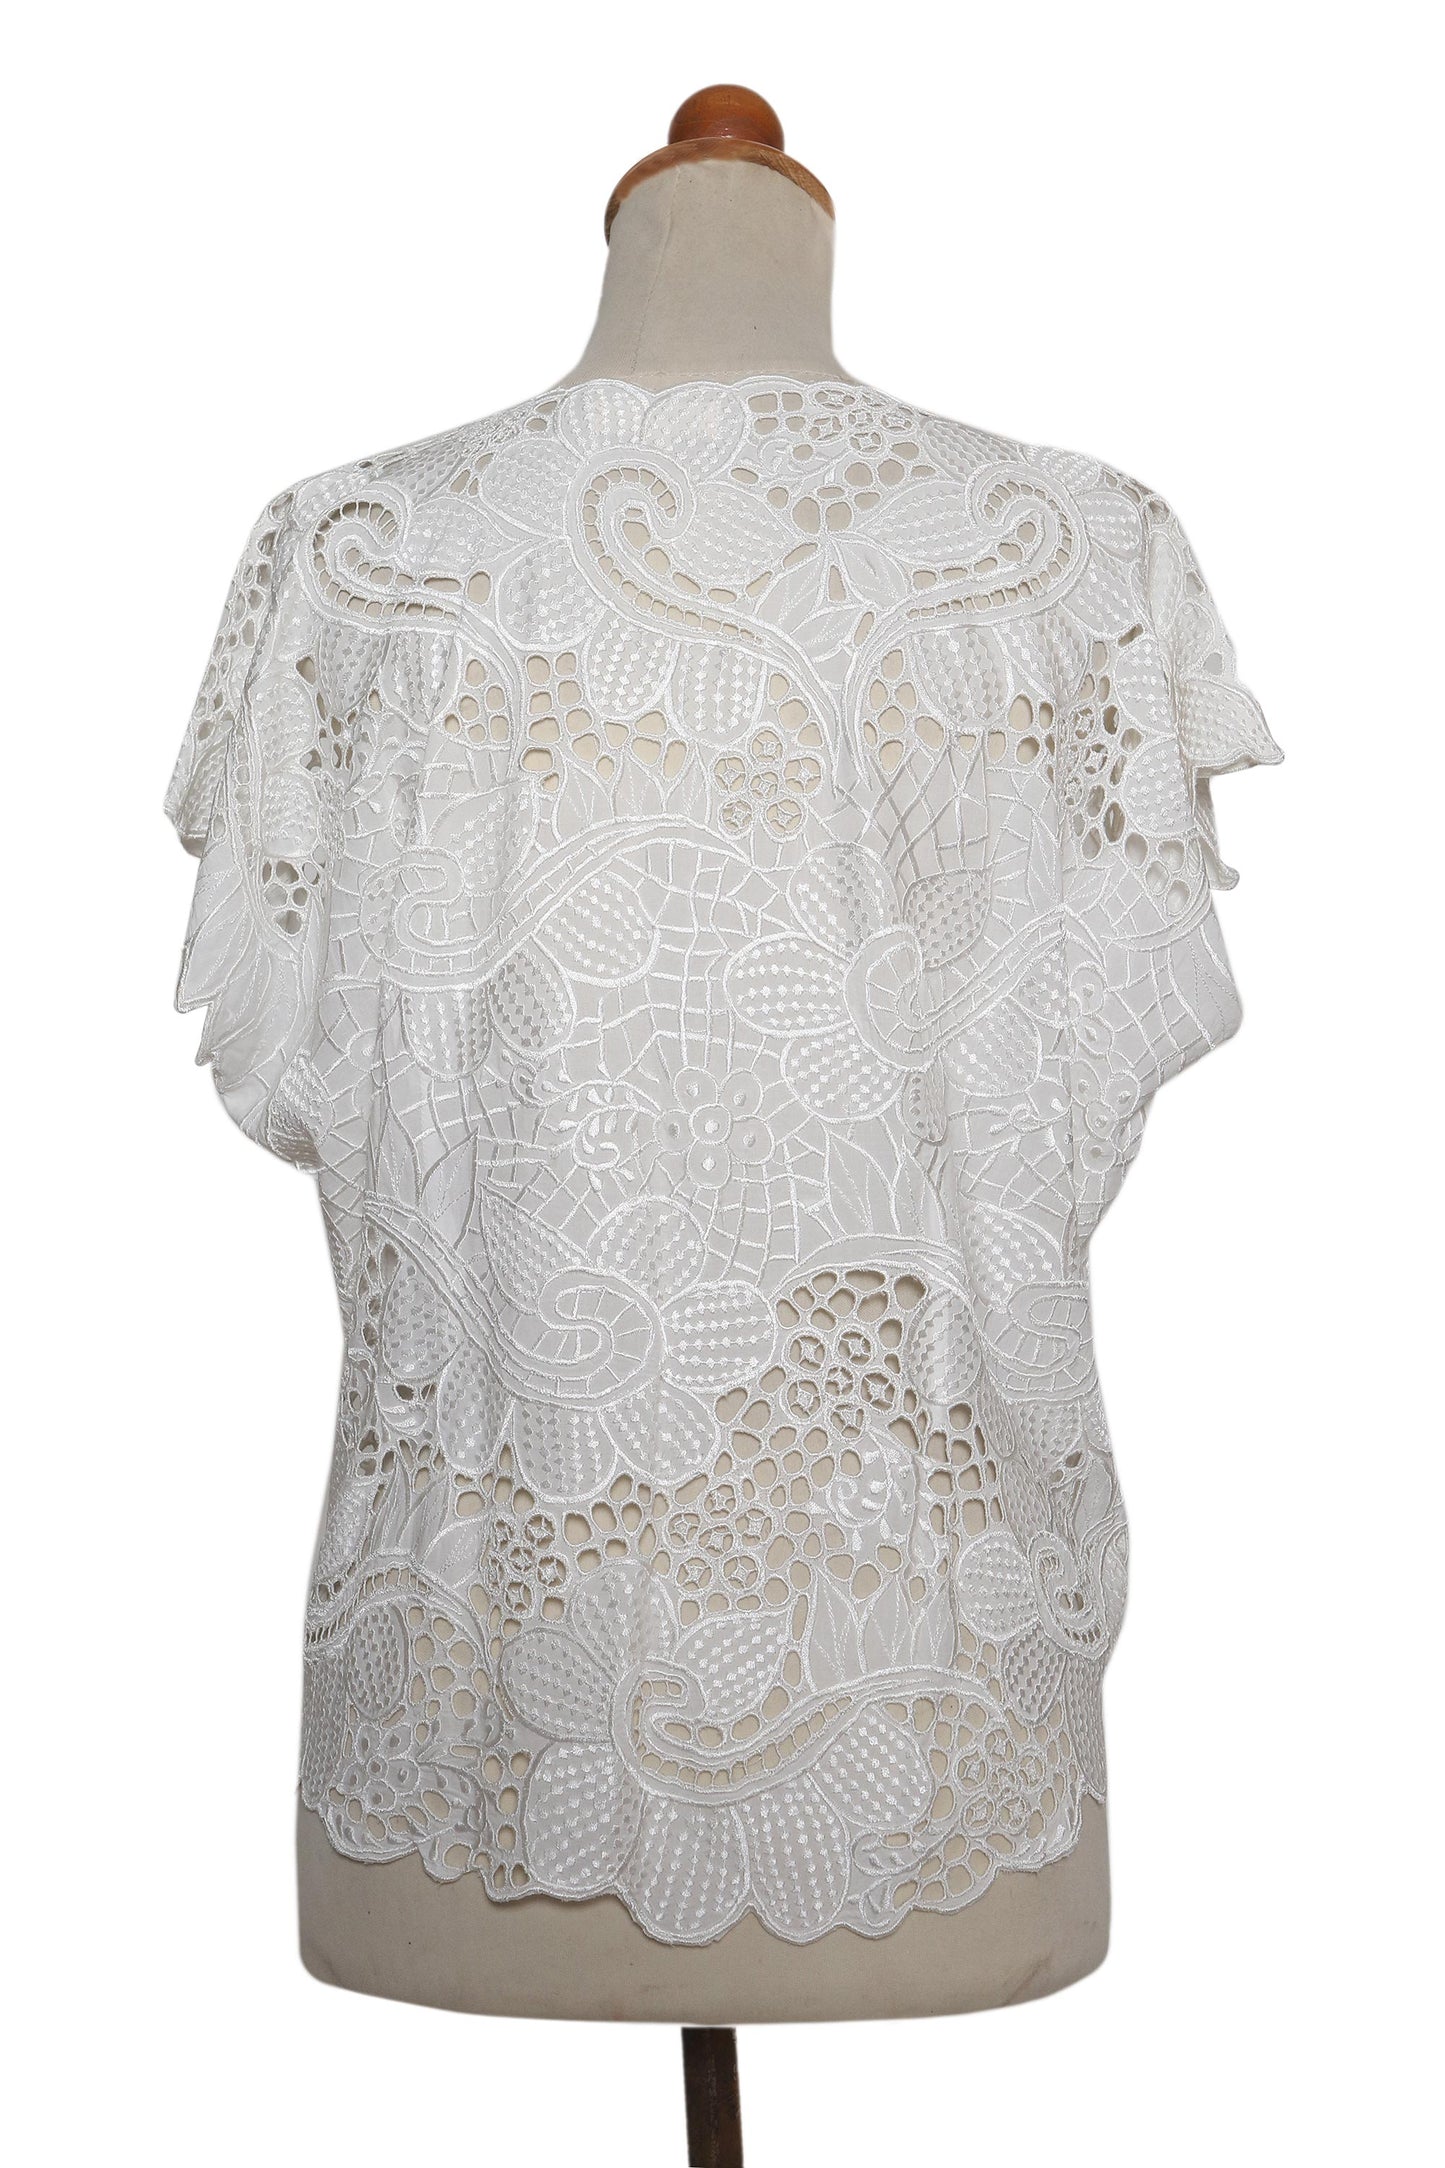 Rose Mallow in White Floral White-On-White Openwork and Embroidered Rayon Top